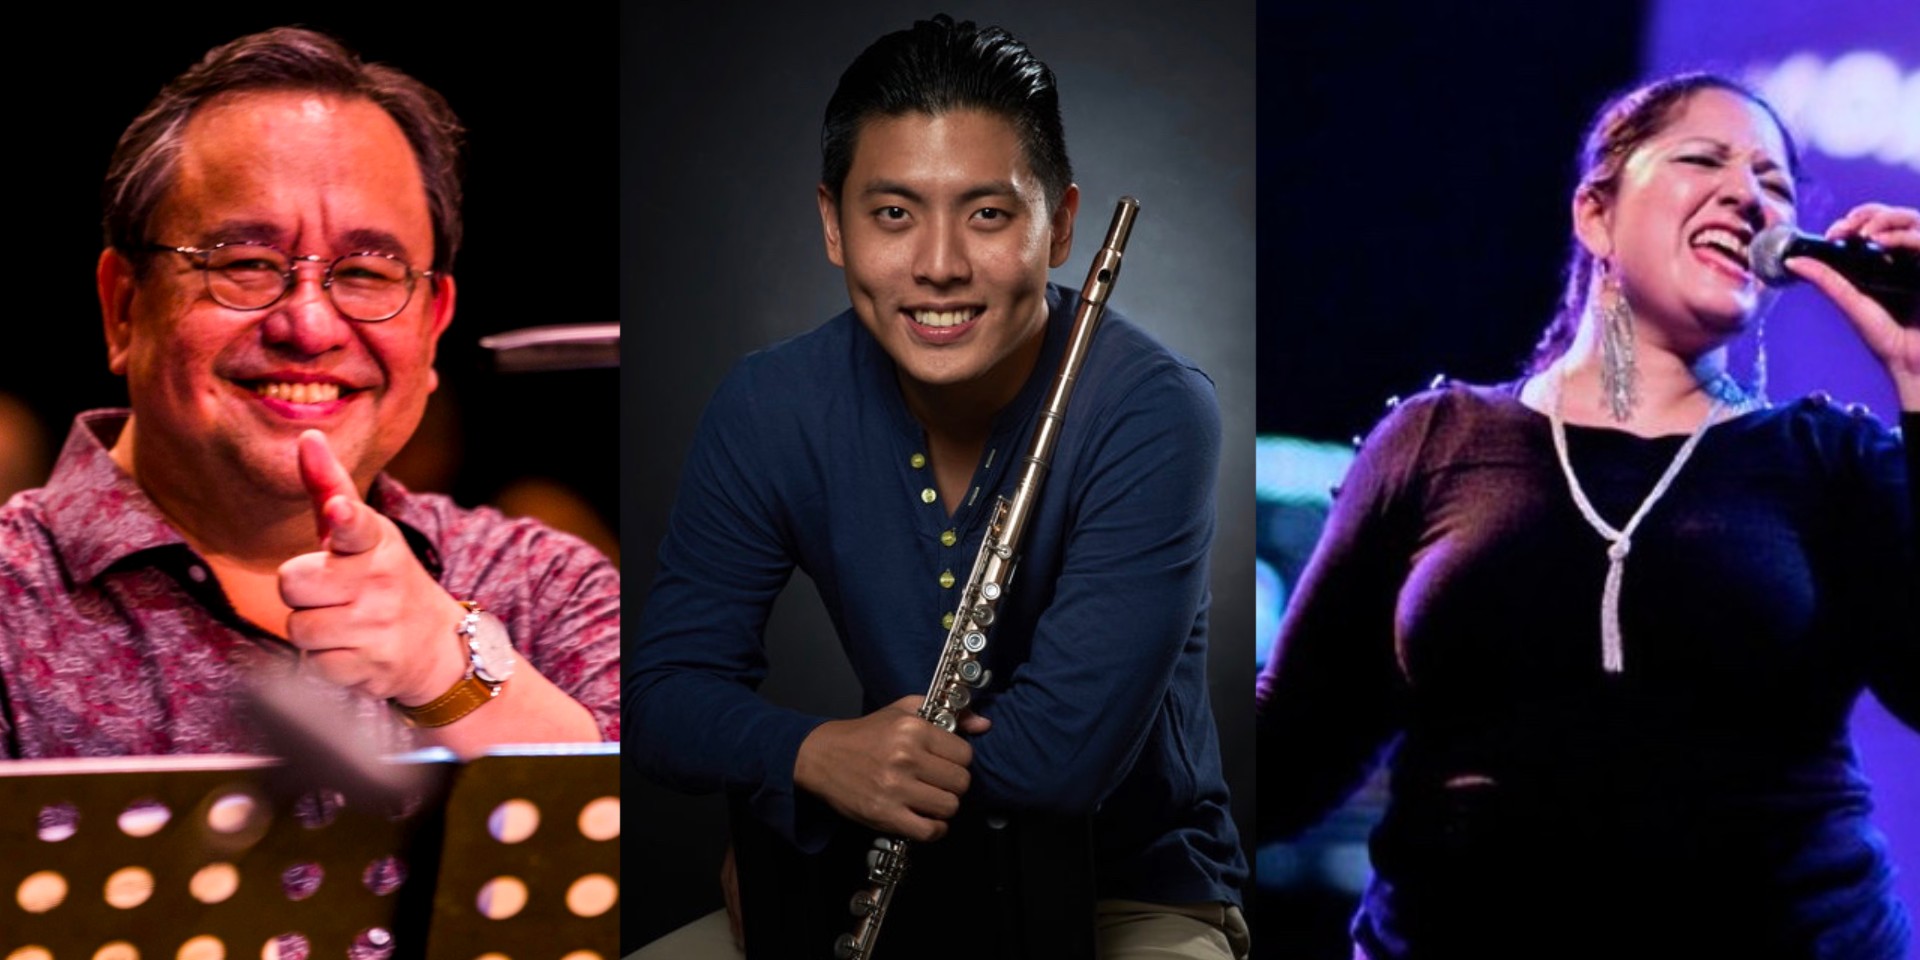 Celebrate International Jazz Day at home tonight, with a livestream concert by Jazz Association (Singapore)